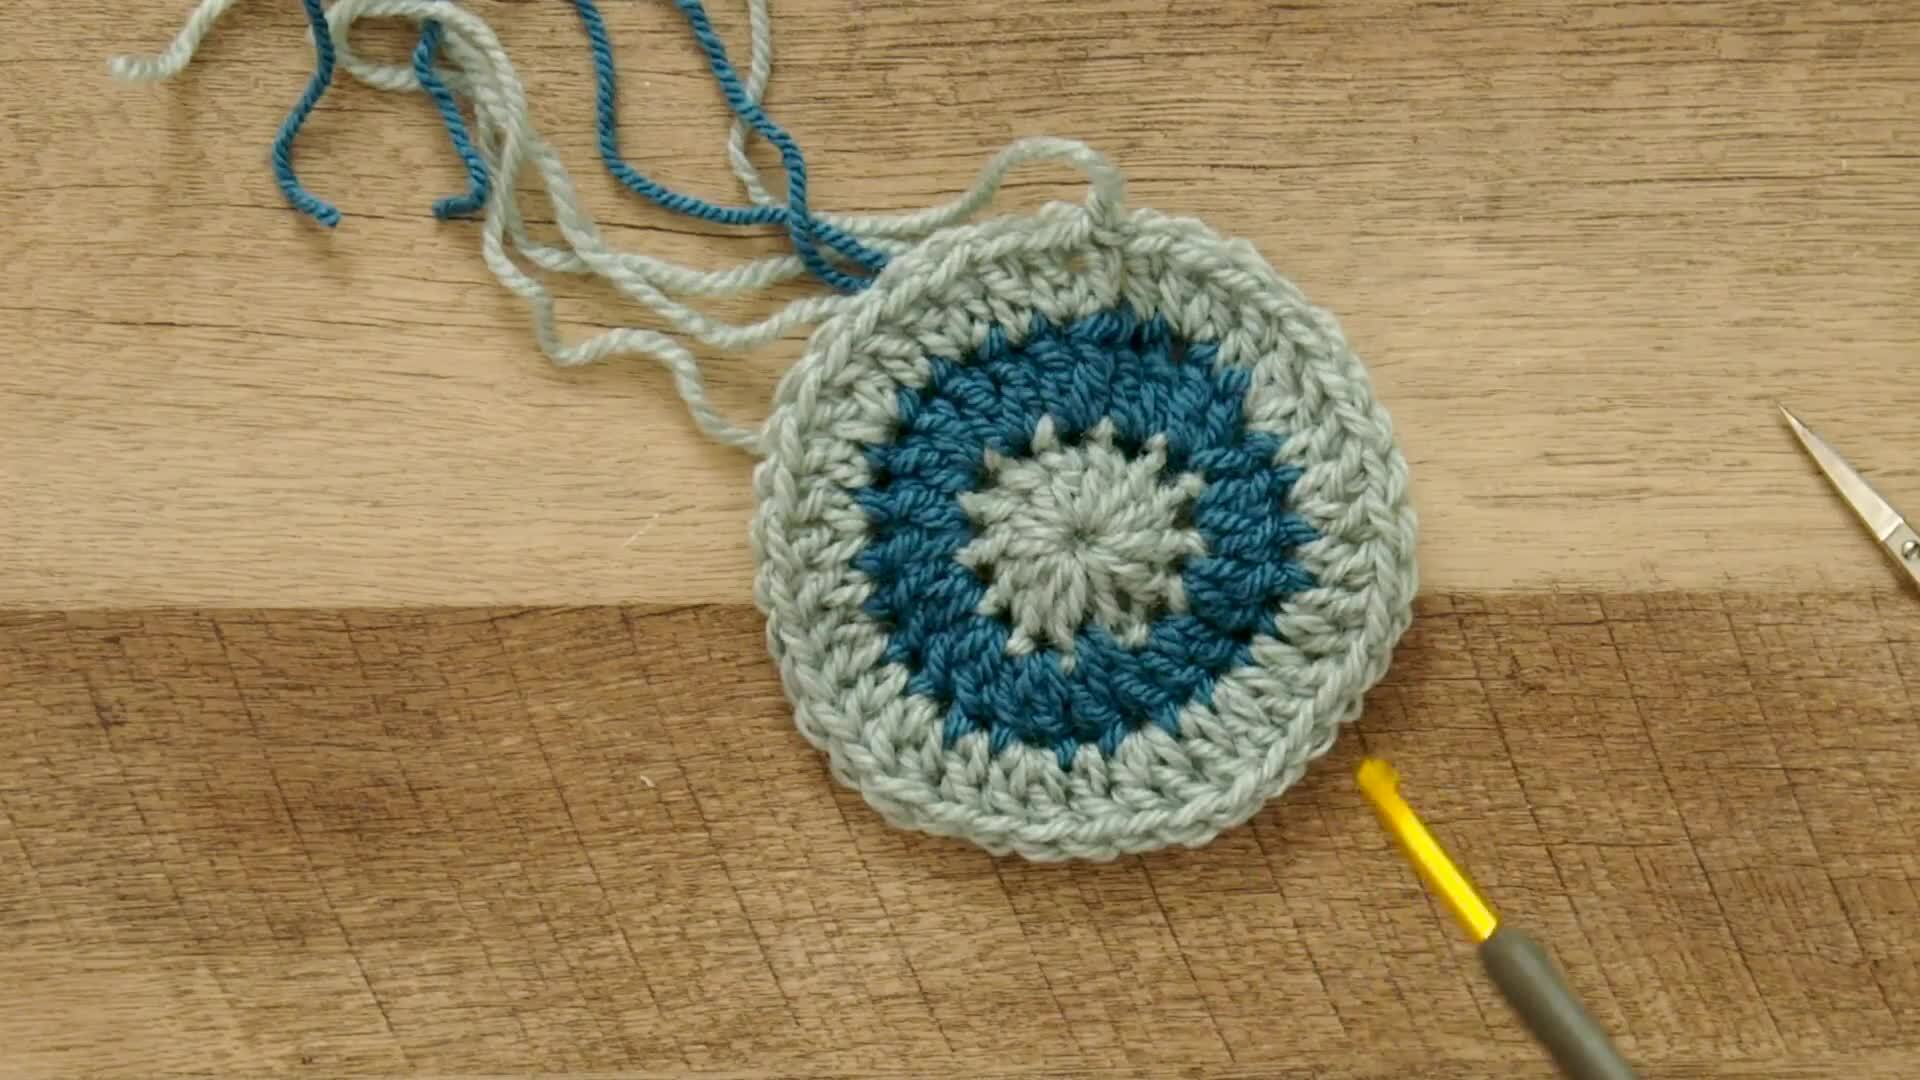 Worked gold-colored crochet or knitting ring, a yarn tension aid for  crocheting and knitting.